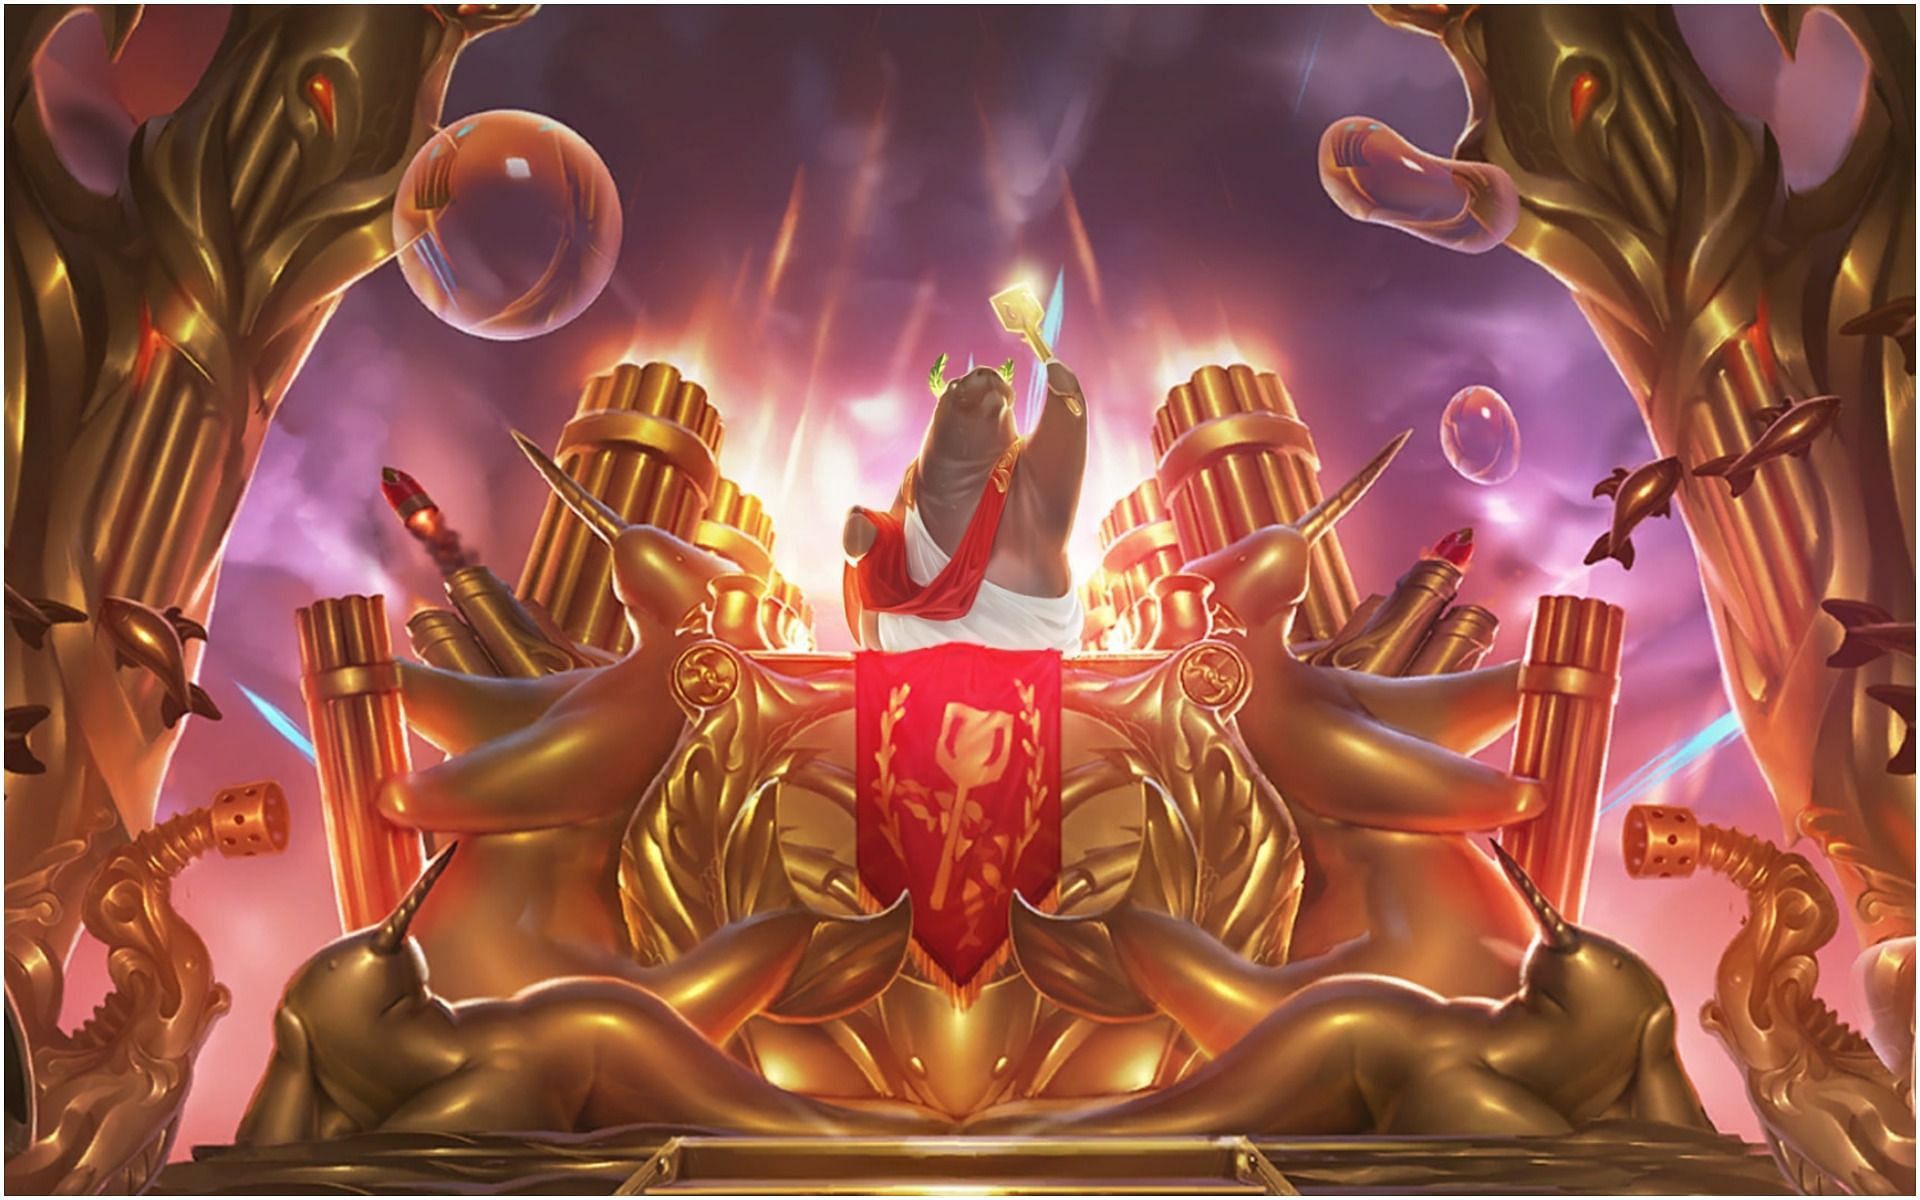 ARURF is set to make a return once more within the game (Image via League of Legends)